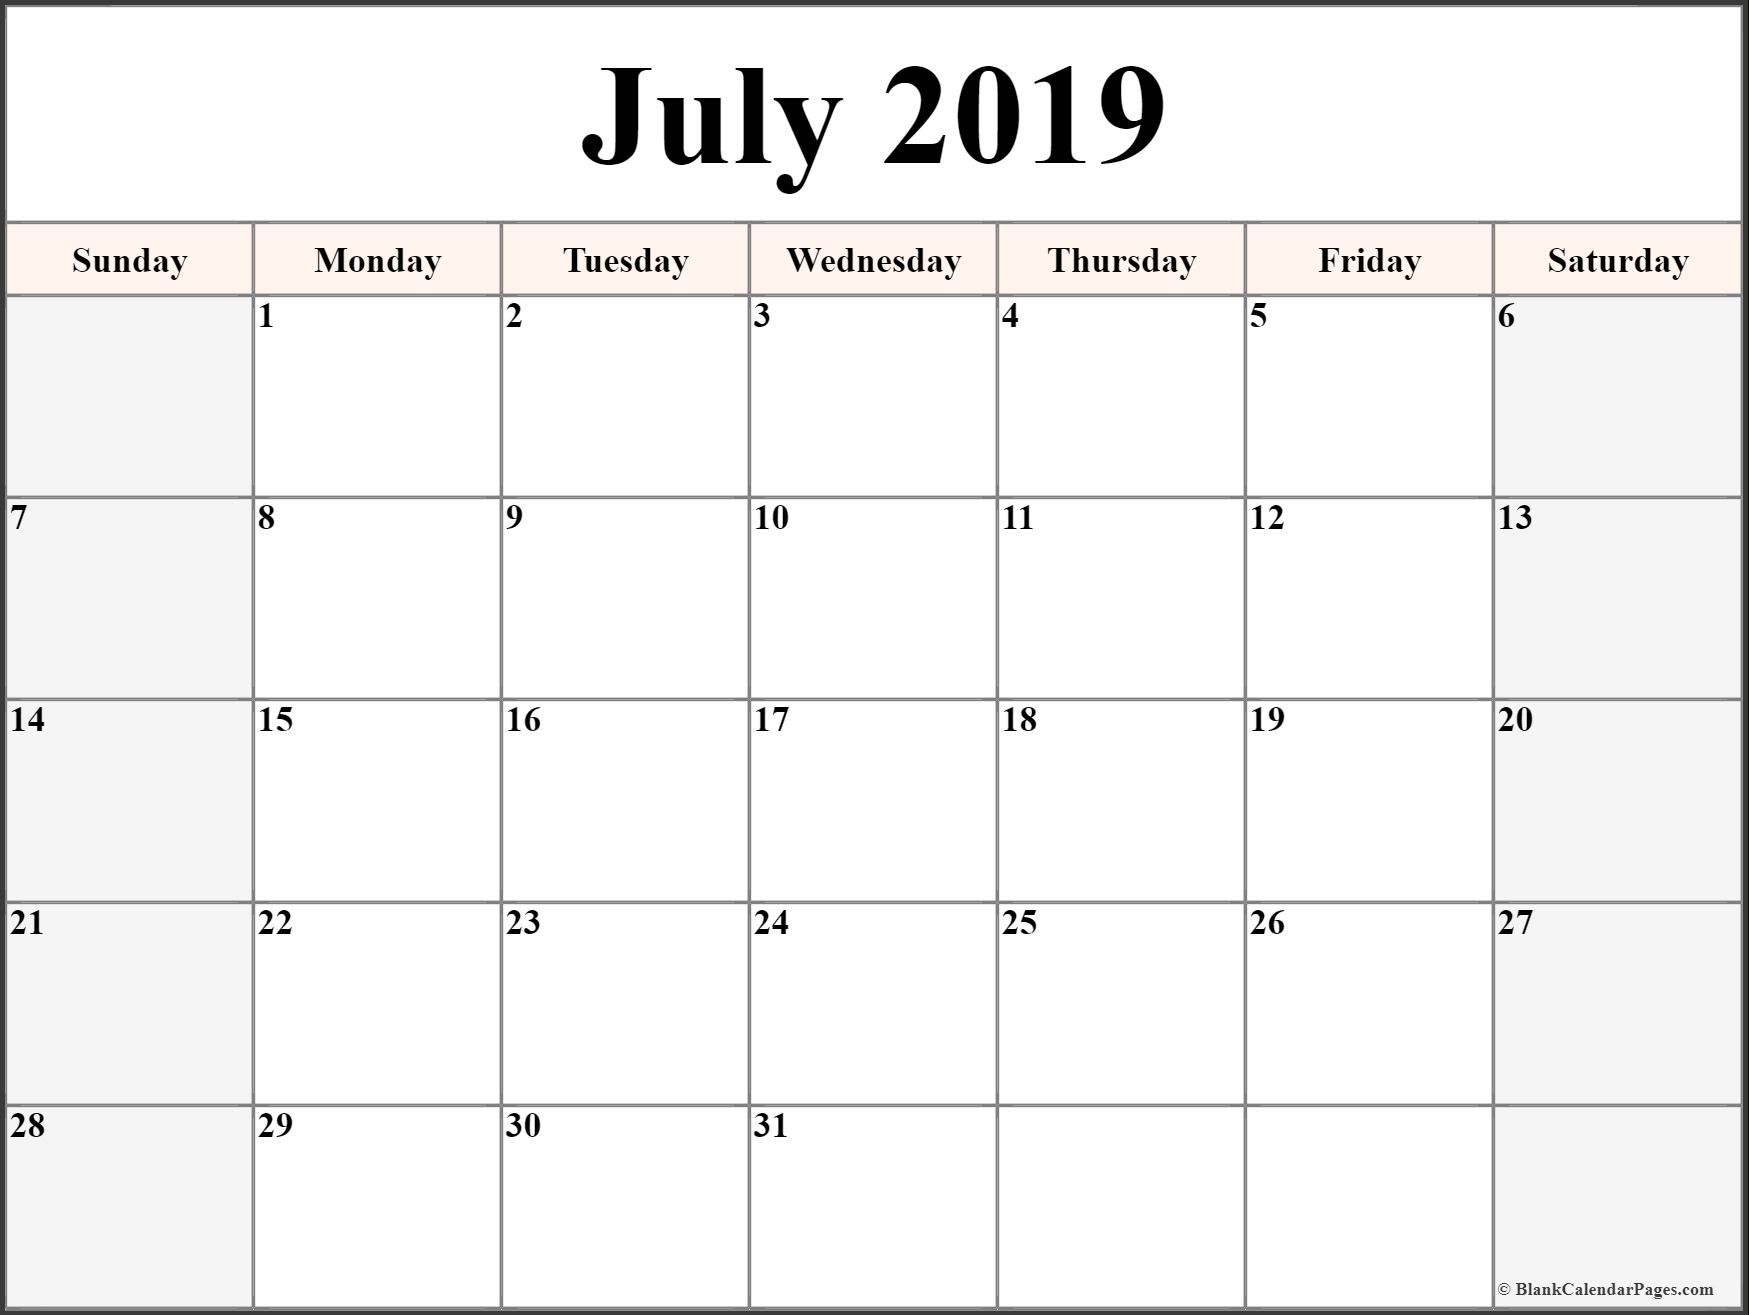 July 2019 Printable Calendar Blank Templates - Calendar Hour-Blank Timetable For The Month Of July And August